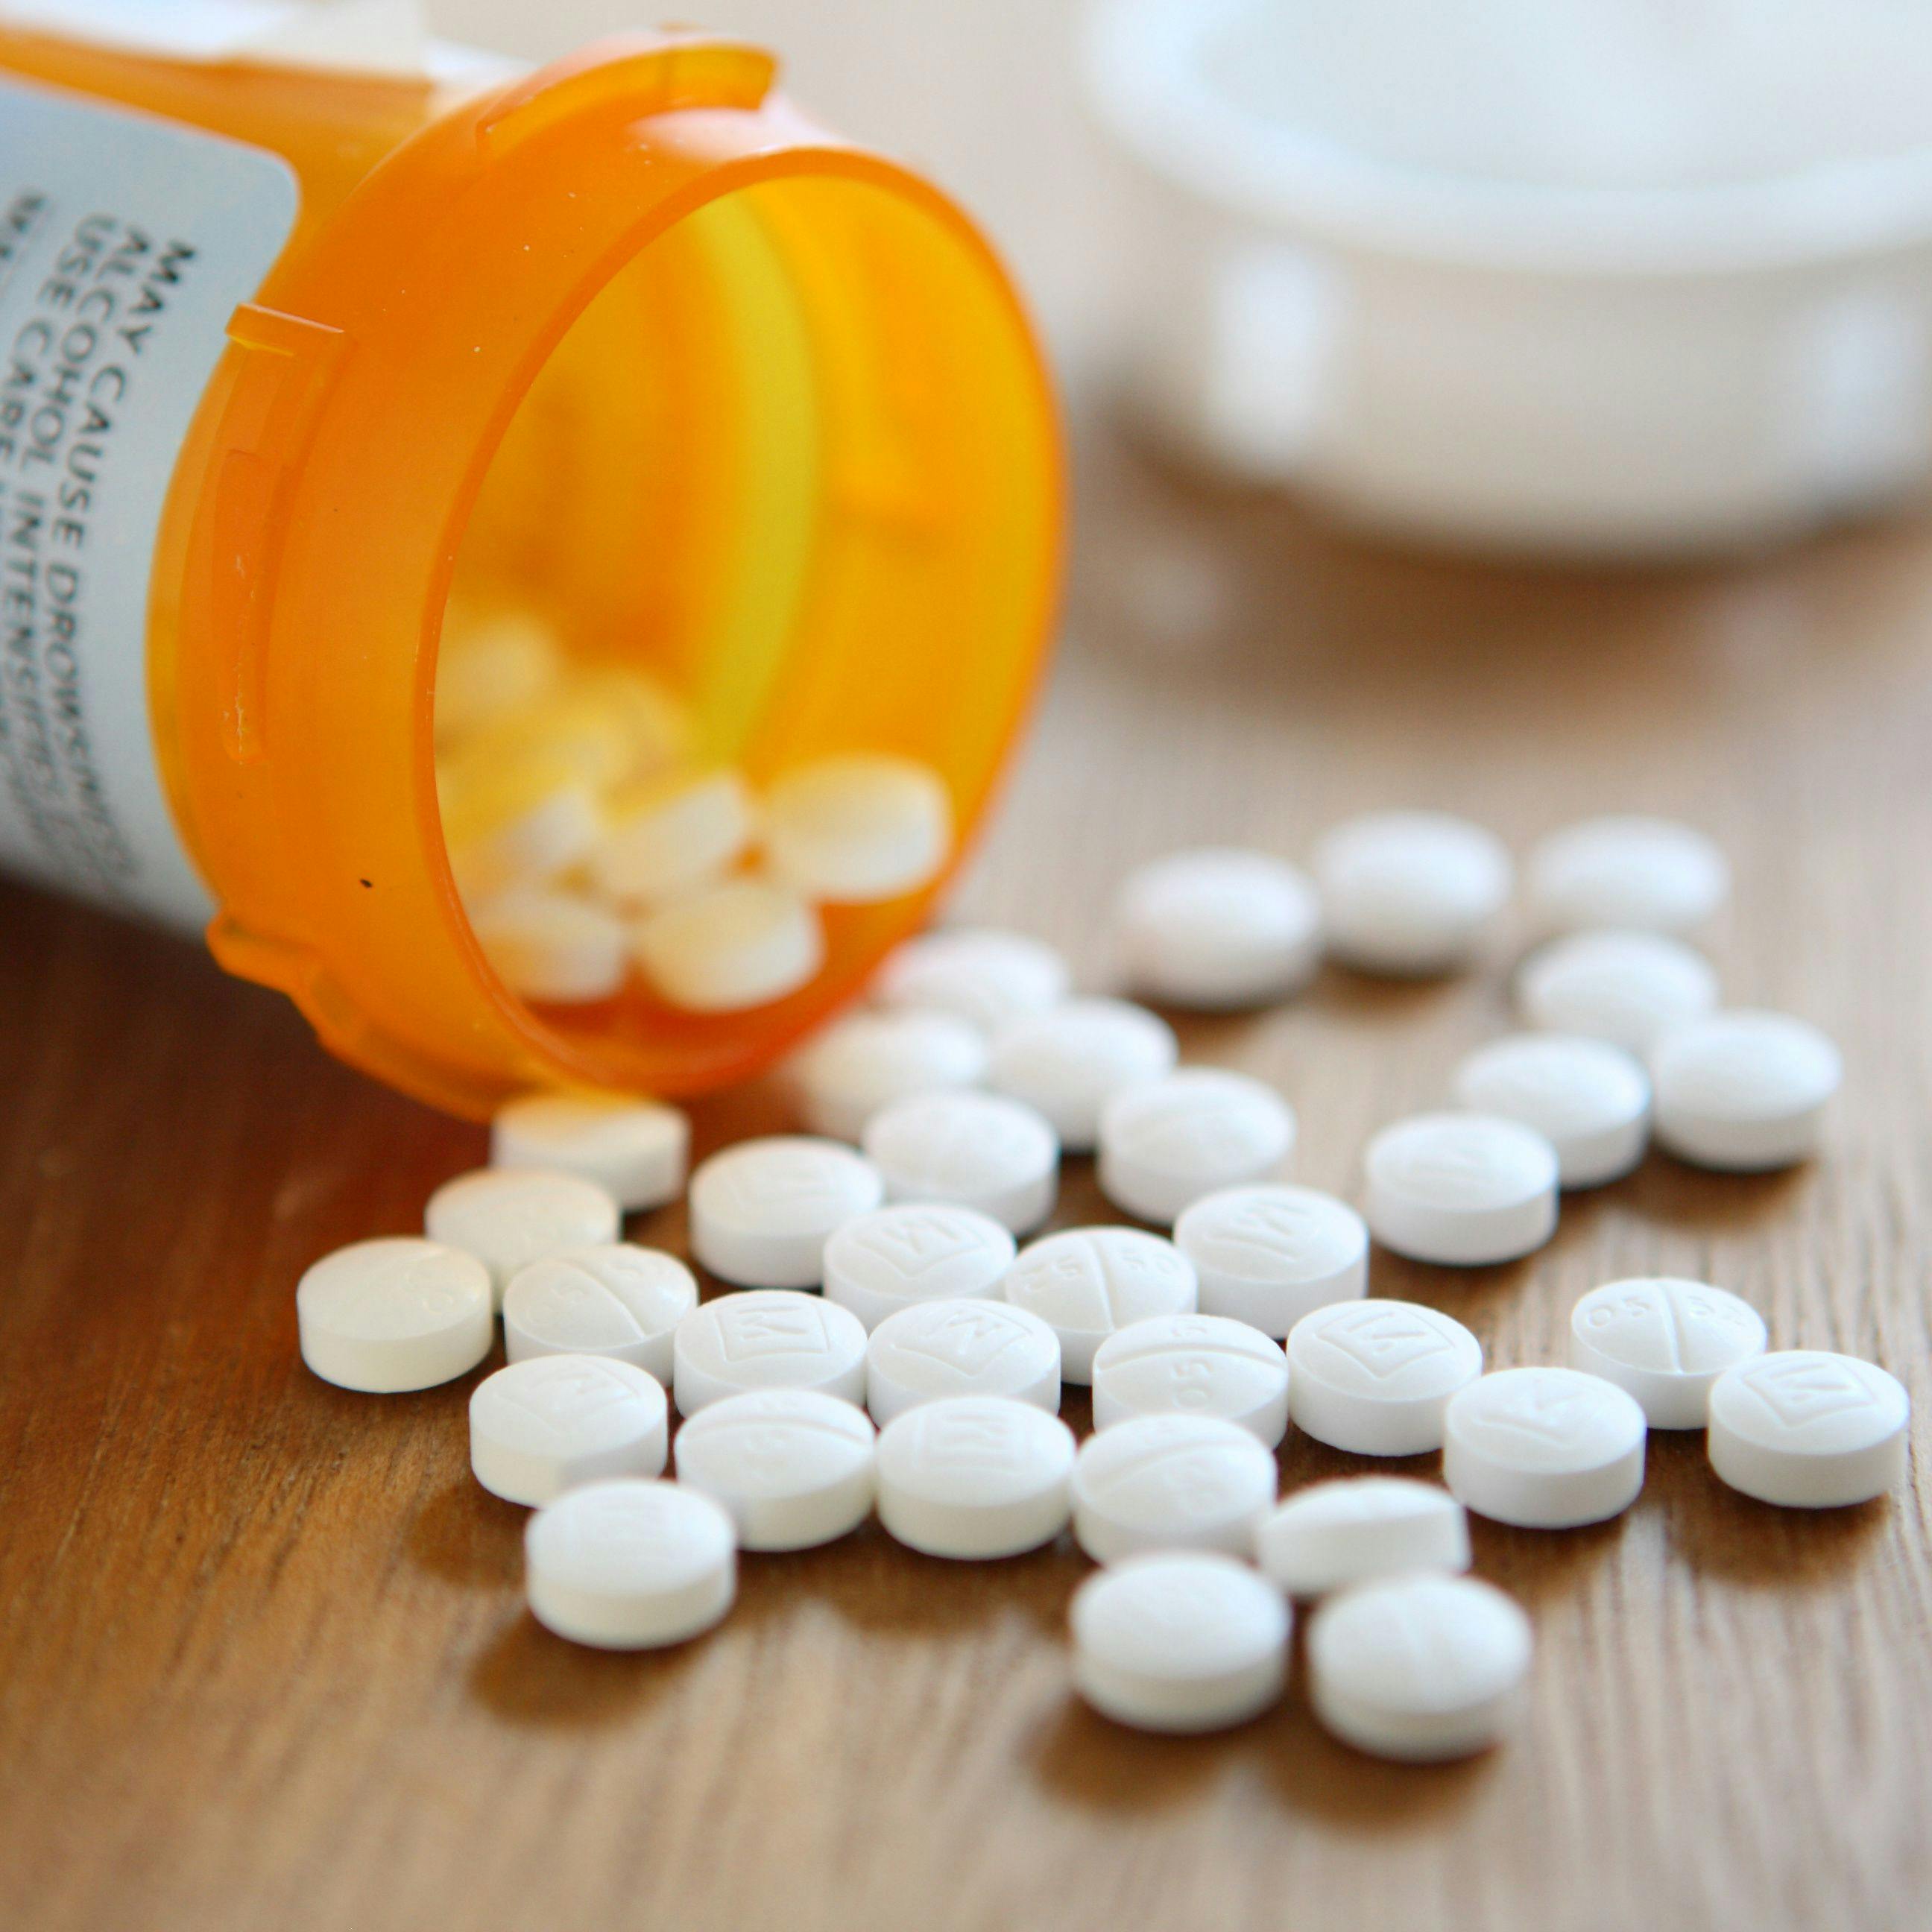 Evidence-Based Medications for Opioid Use Disorder Underutilized in the US